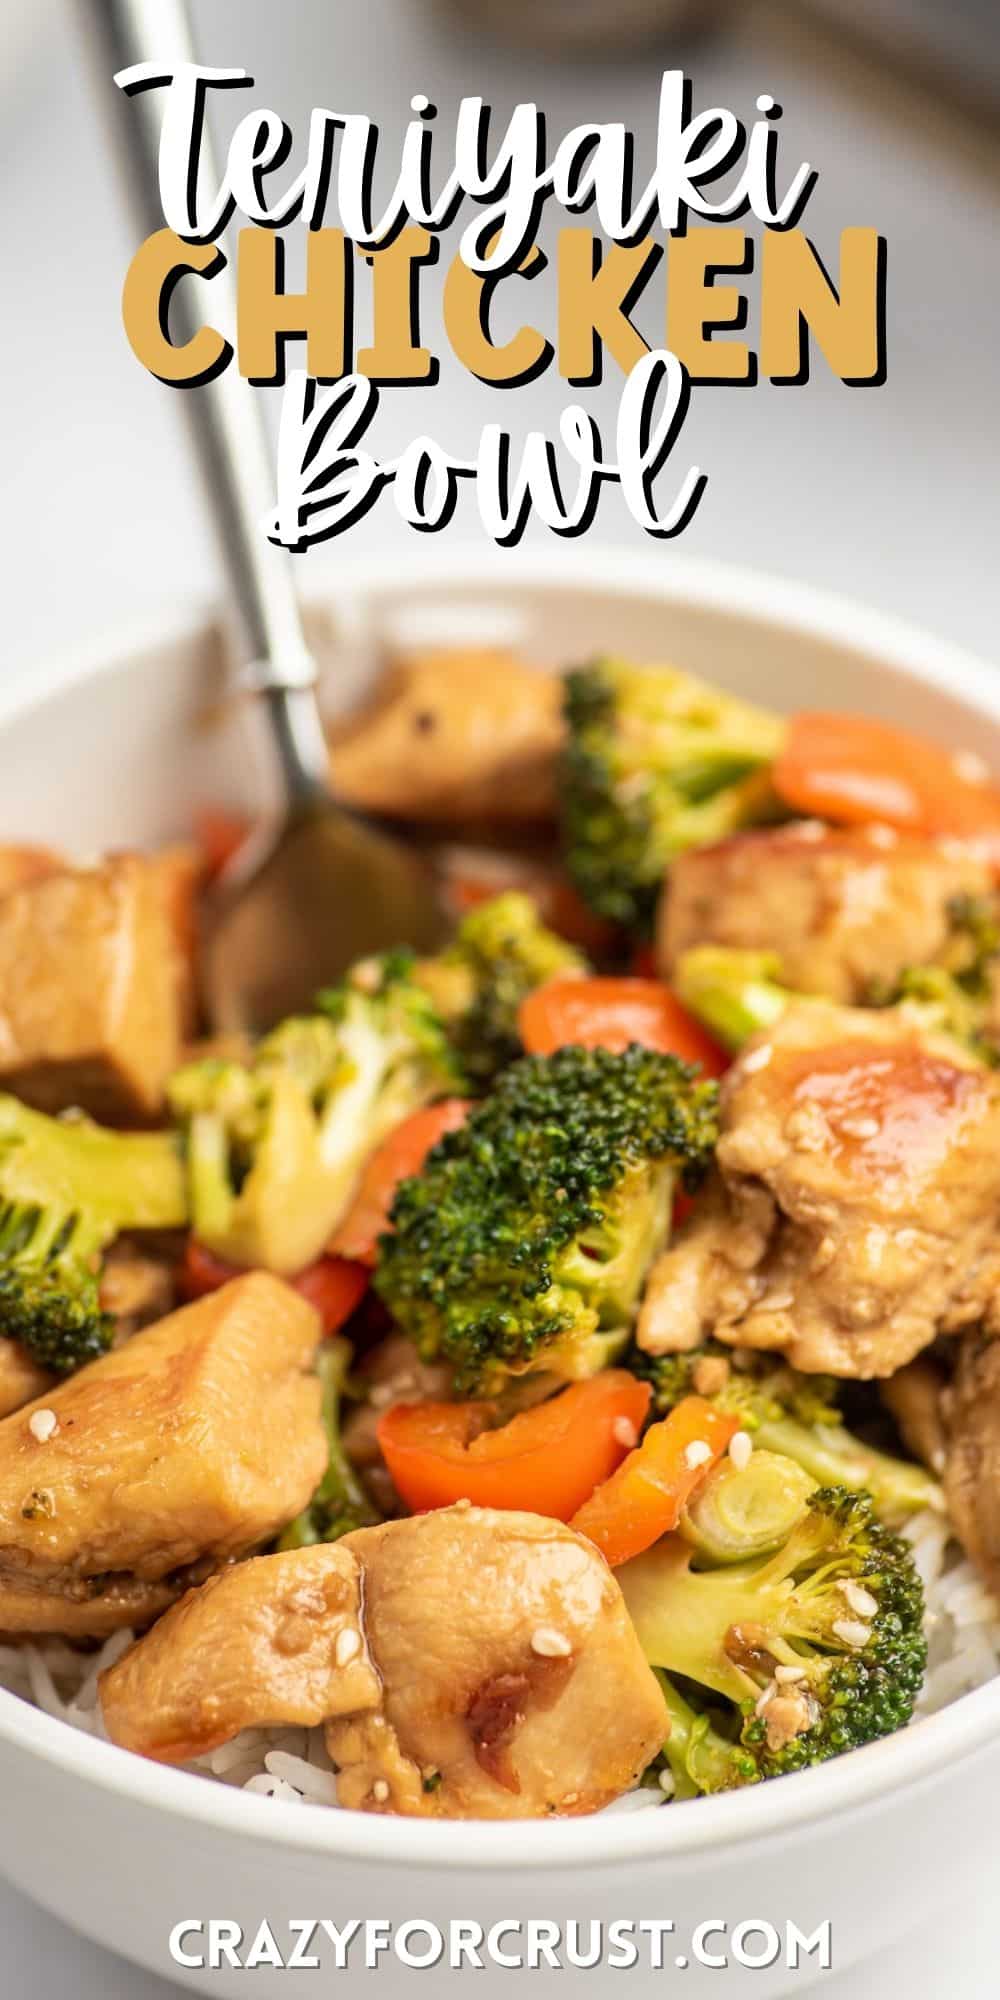 chicken broccoli and carrots in a white bowl with words on top